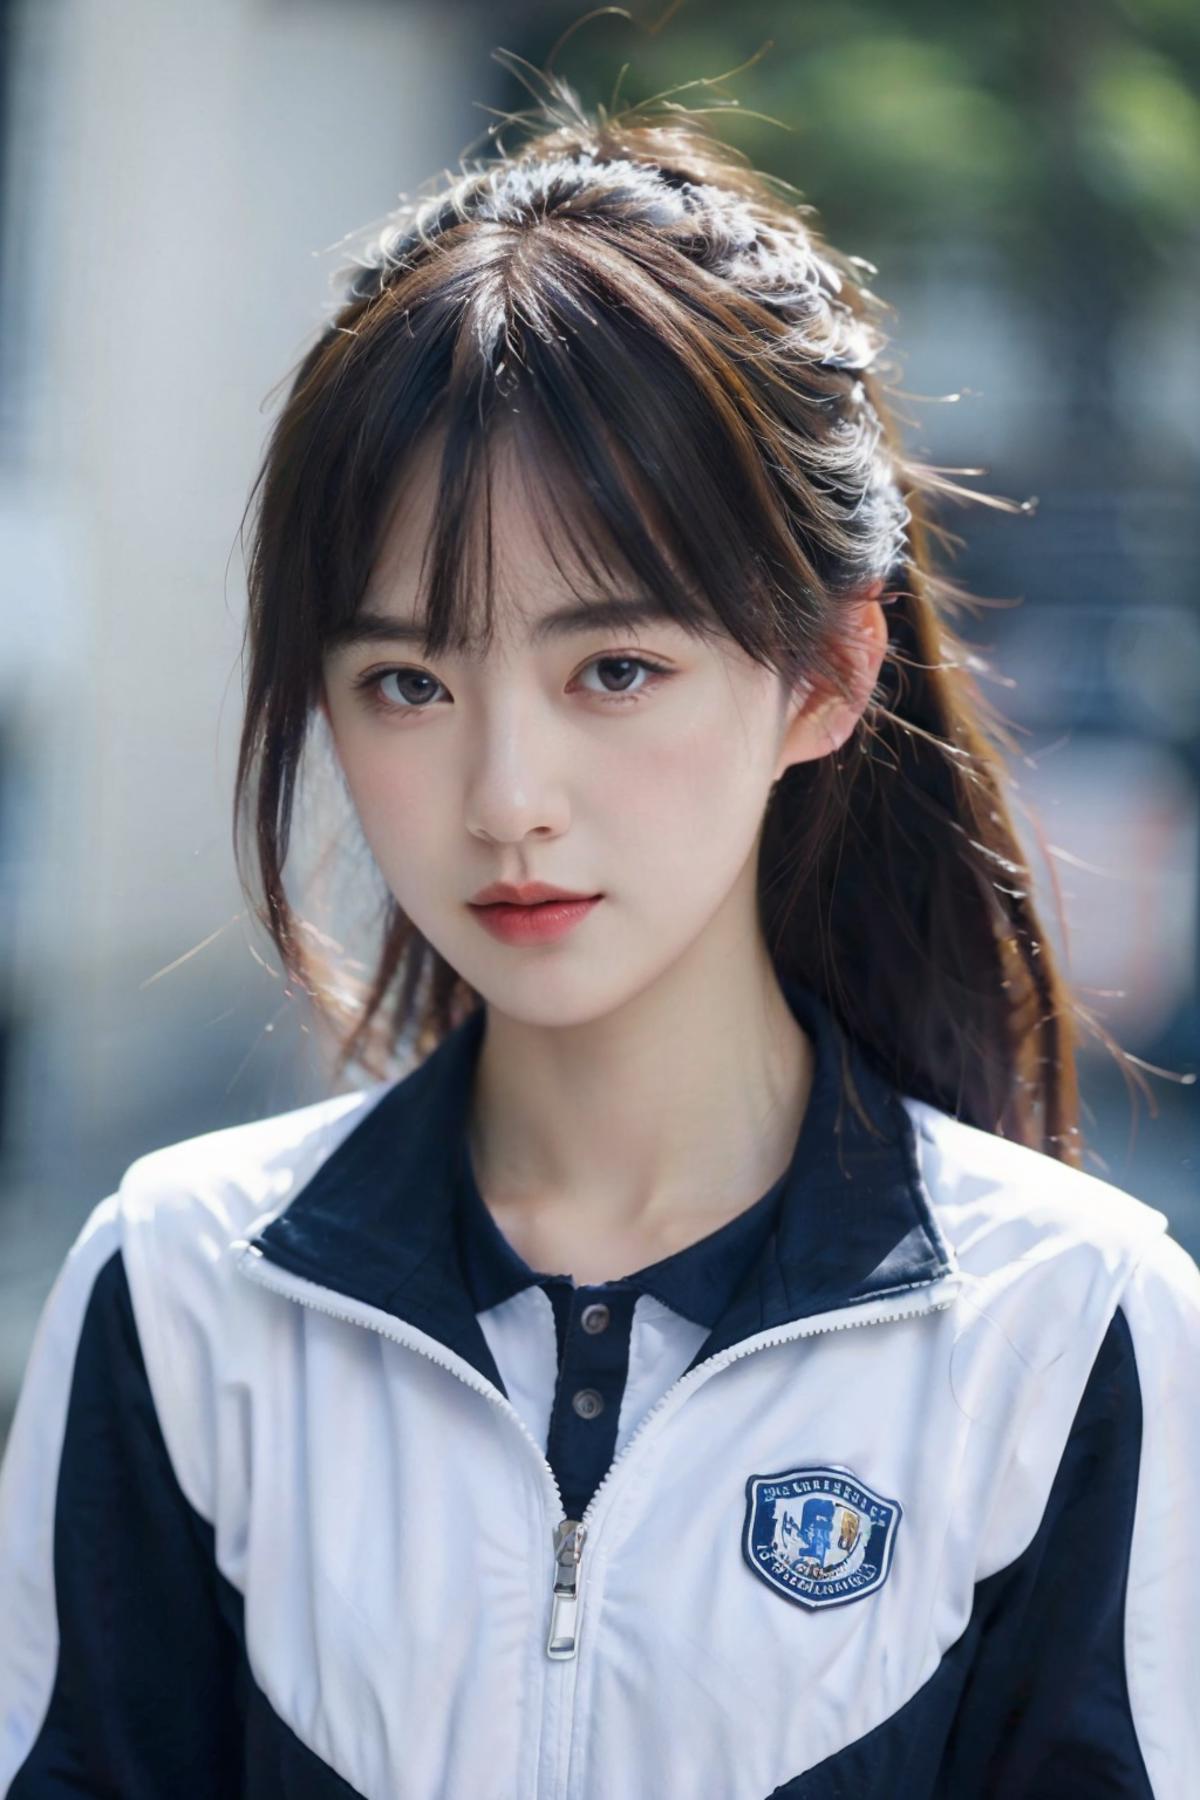 AI model image by xiaozhe1925828